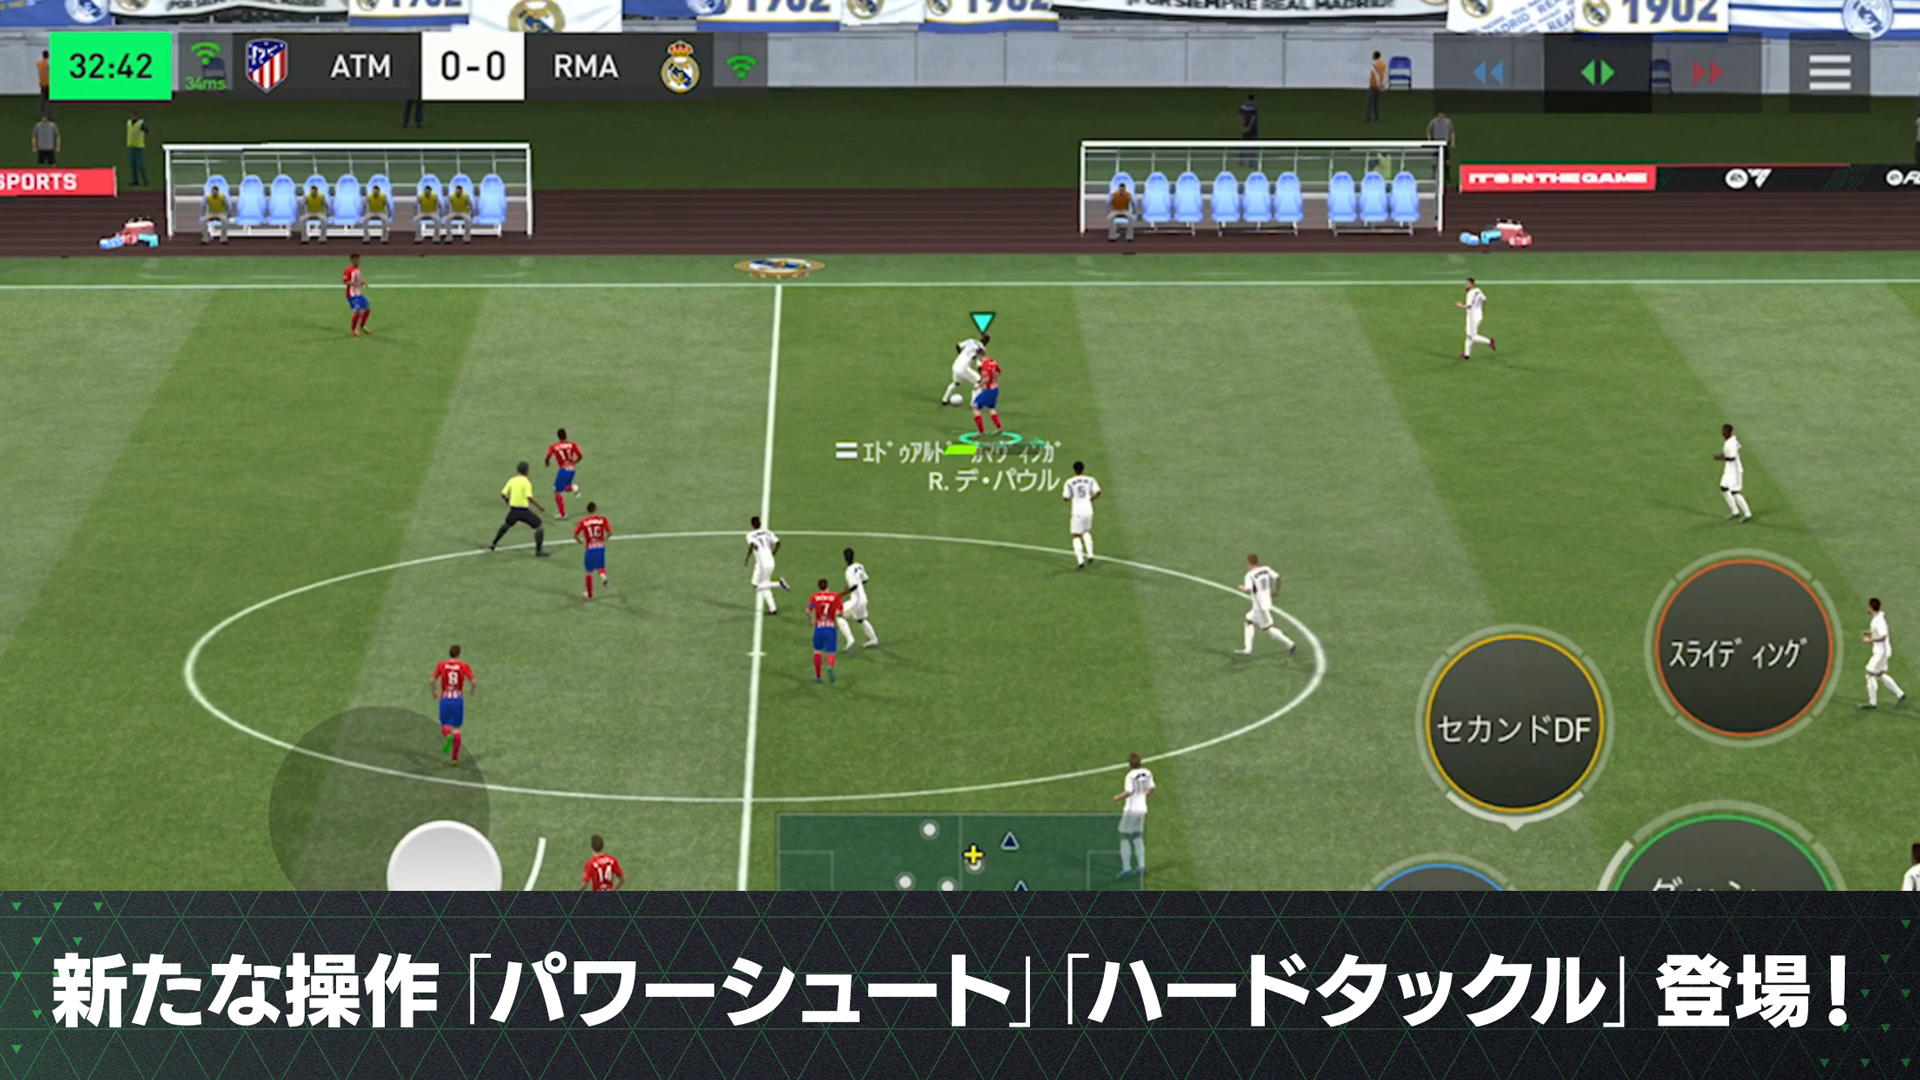 EA SPORTS FC Mobile Soccer APK for Android - Download